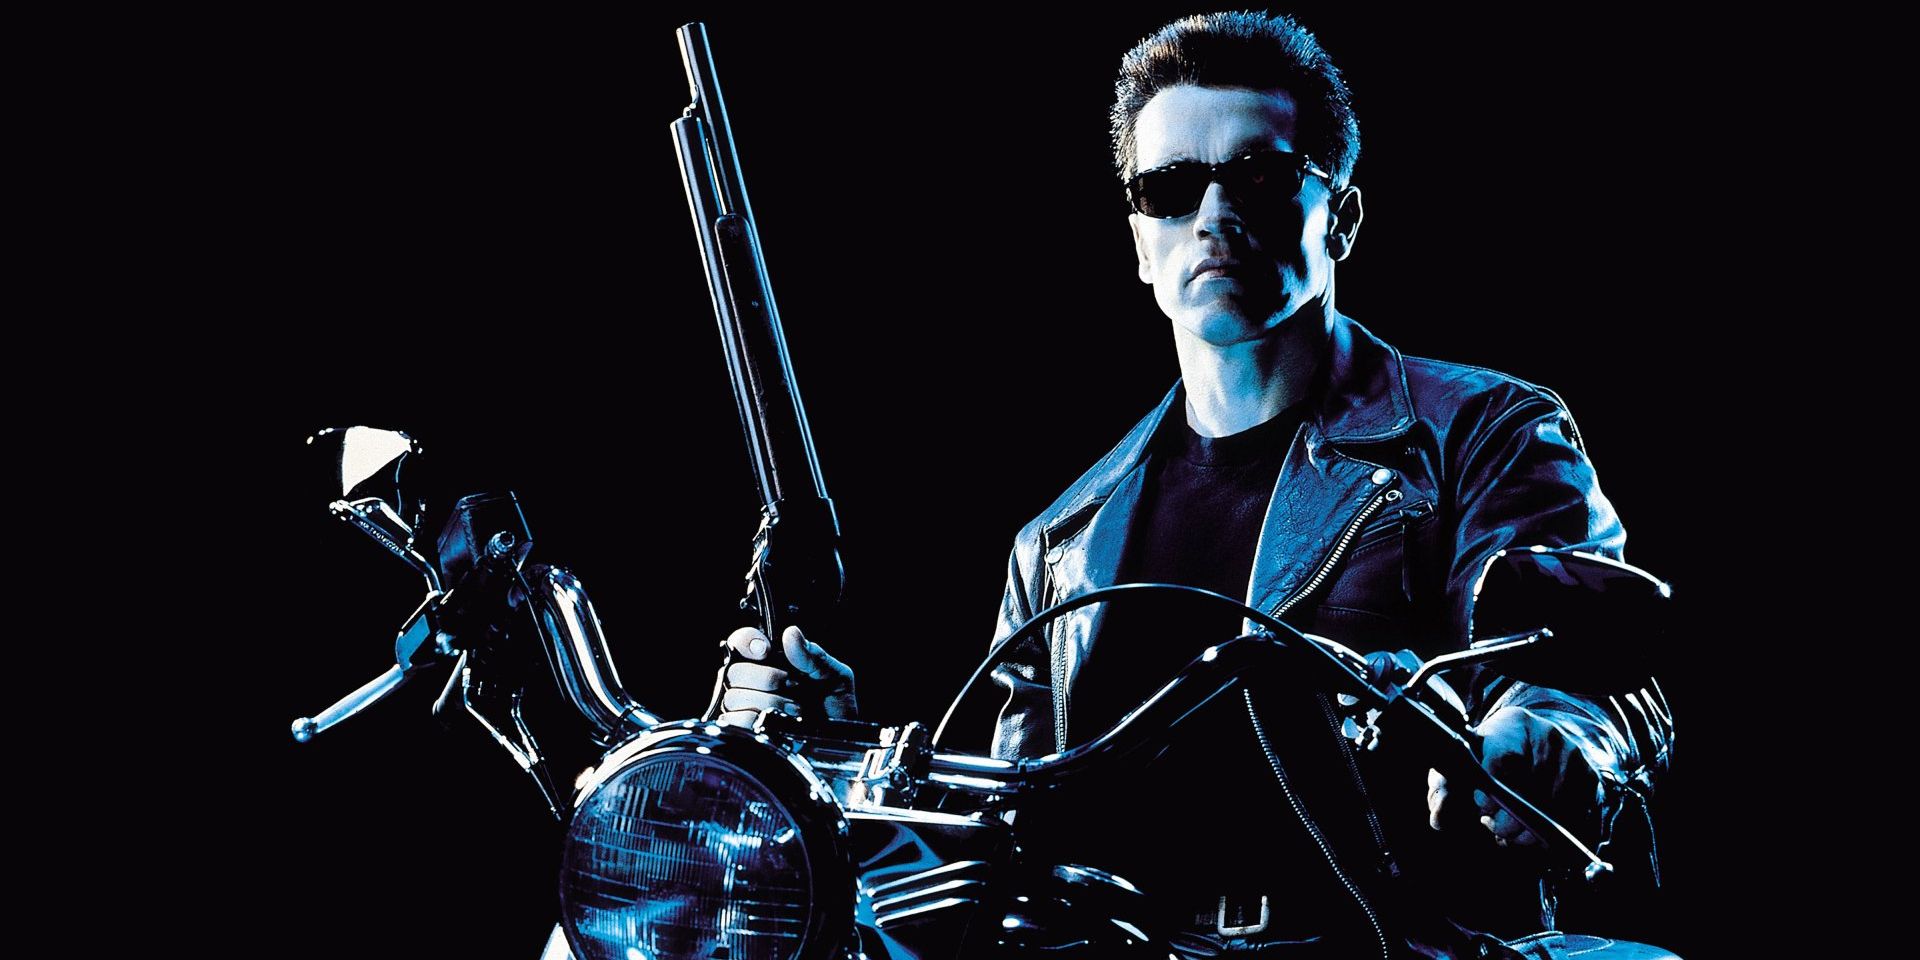 The Terminator sits on his motorcycle holding a shotgun.